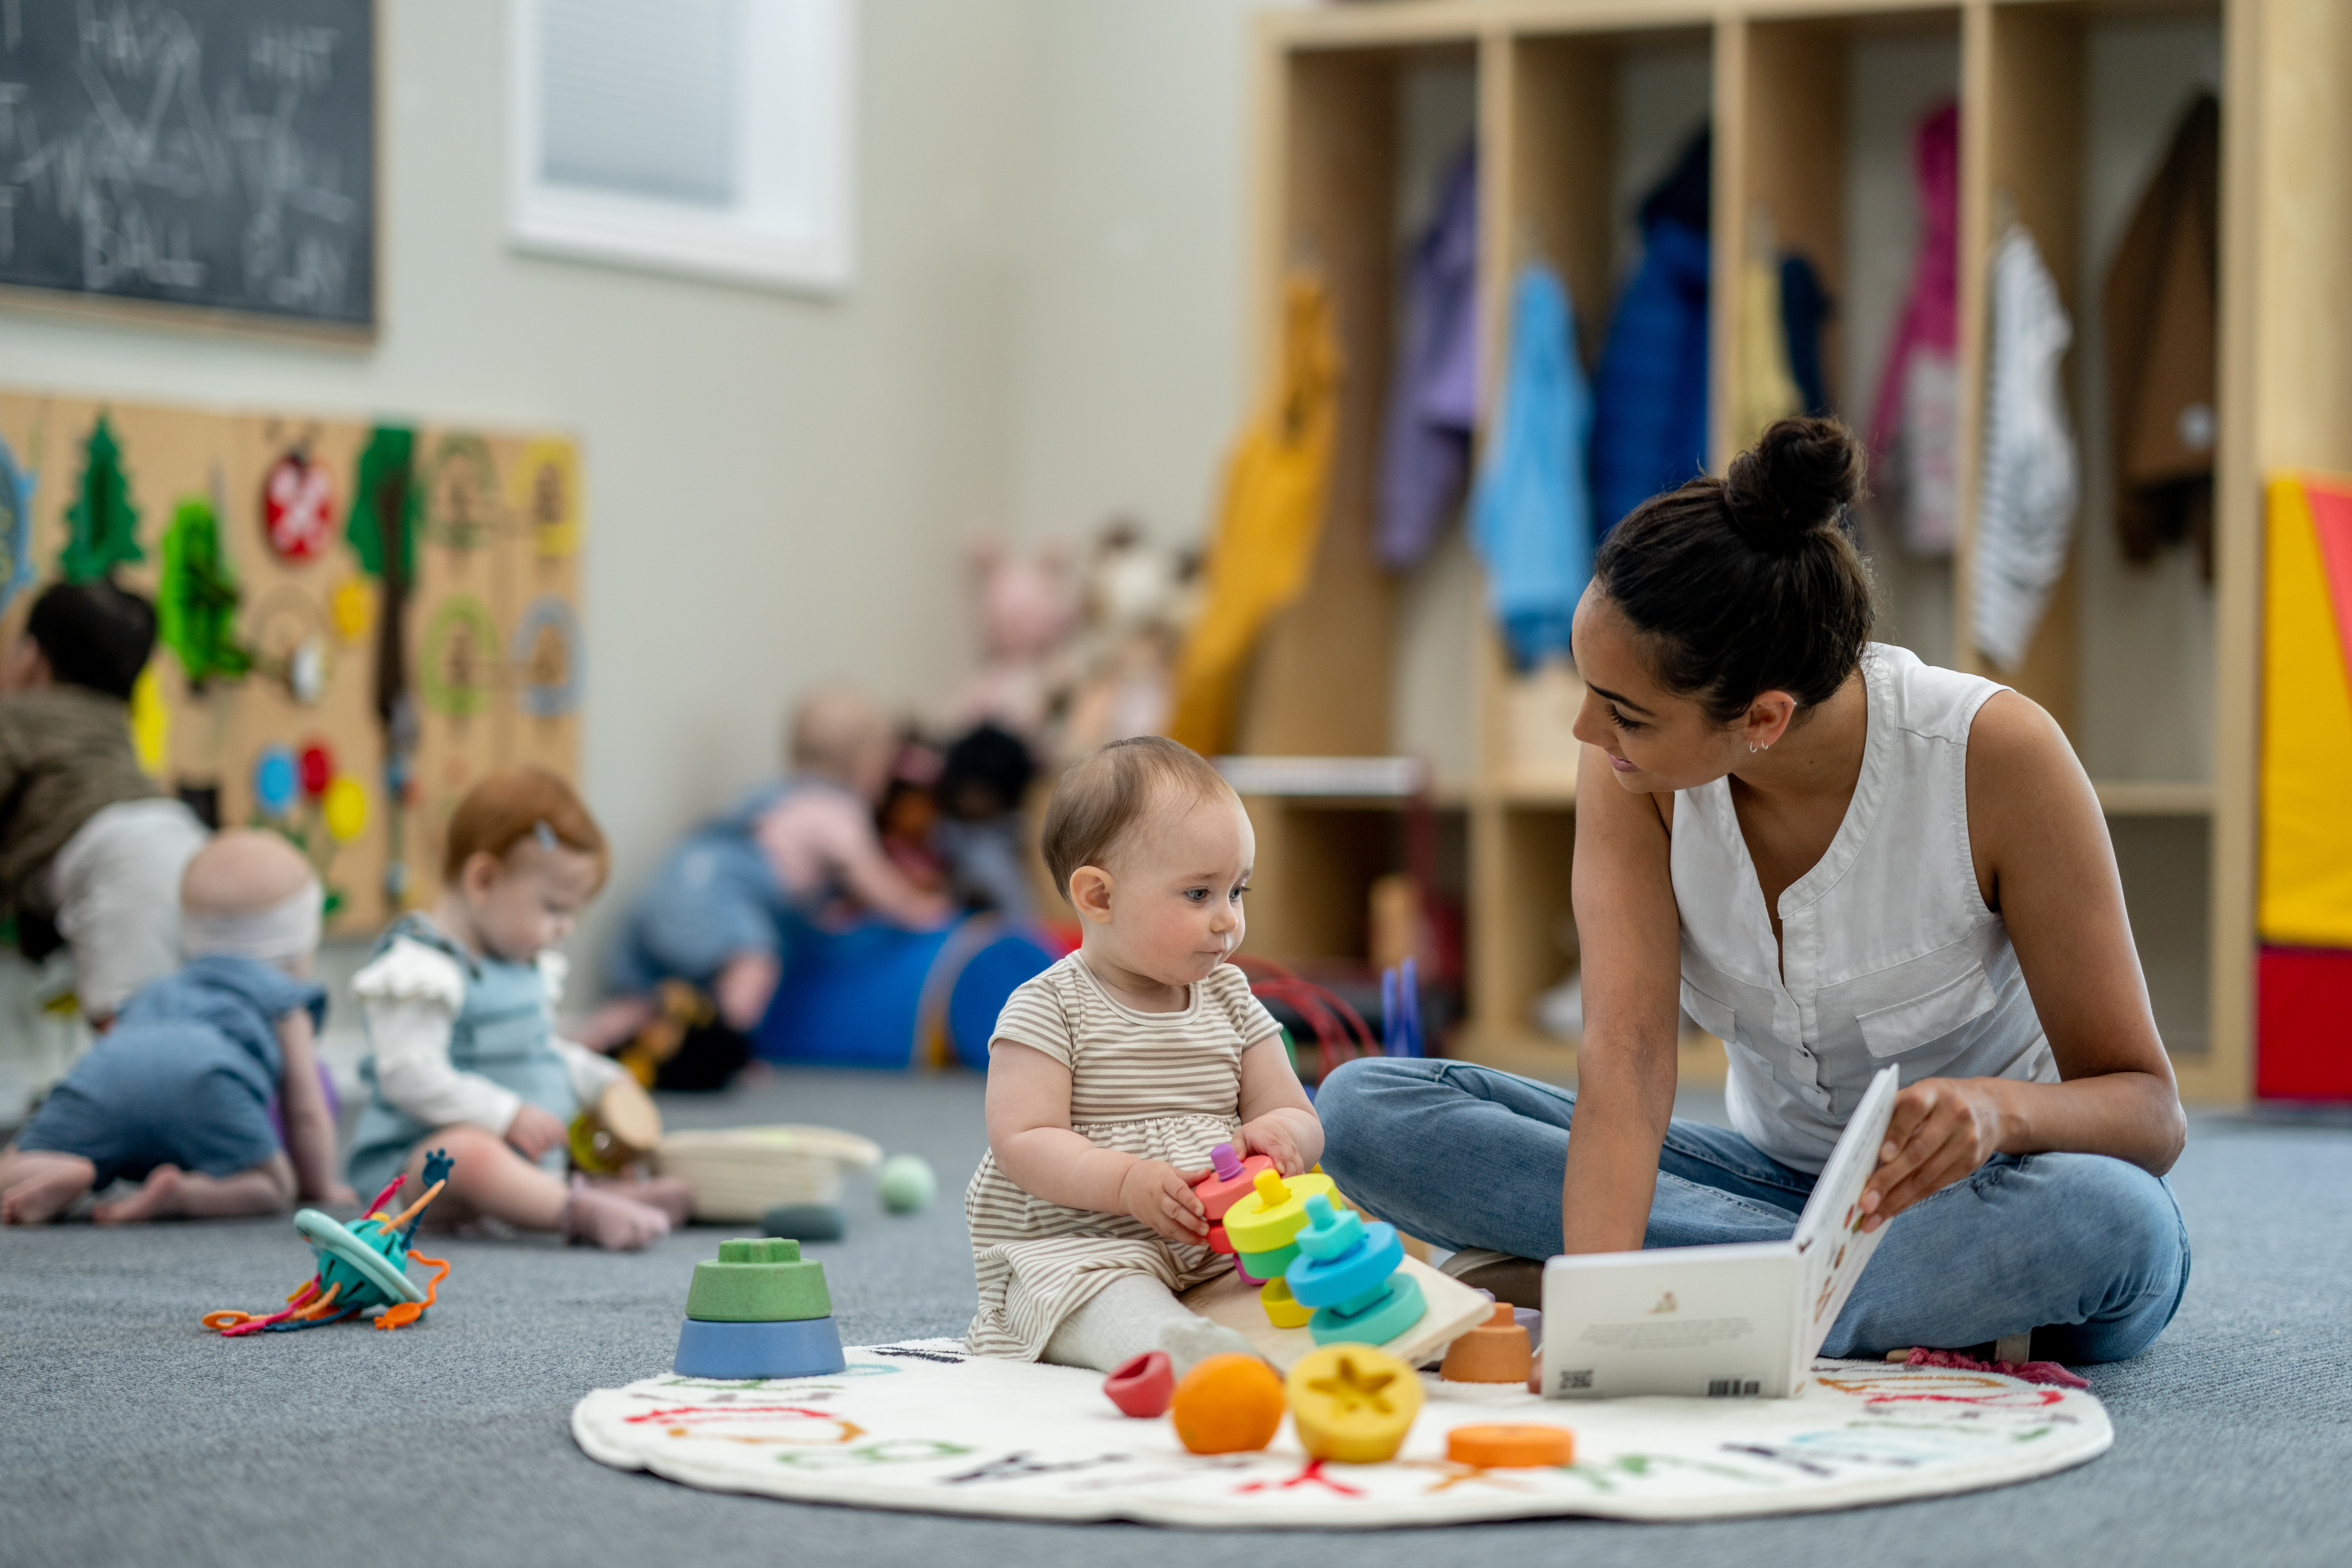 early childhood education graduate programs in florida